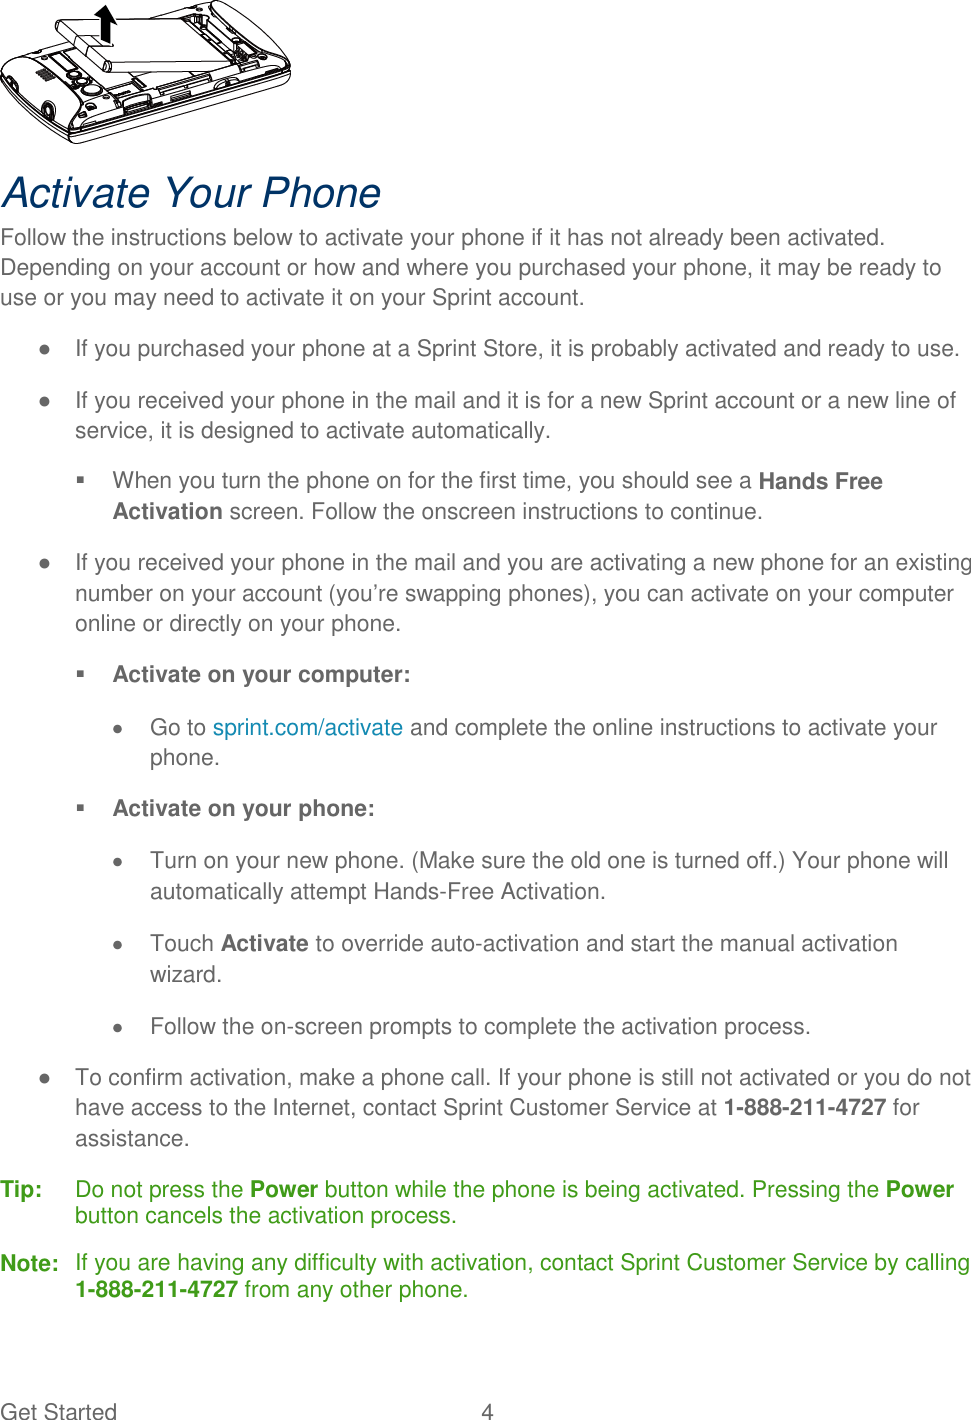 Get Started  4  Activate Your Phone Follow the instructions below to activate your phone if it has not already been activated. Depending on your account or how and where you purchased your phone, it may be ready to use or you may need to activate it on your Sprint account. ●  If you purchased your phone at a Sprint Store, it is probably activated and ready to use. ●  If you received your phone in the mail and it is for a new Sprint account or a new line of service, it is designed to activate automatically.   When you turn the phone on for the first time, you should see a Hands Free Activation screen. Follow the onscreen instructions to continue. ●  If you received your phone in the mail and you are activating a new phone for an existing number on your account (you’re swapping phones), you can activate on your computer online or directly on your phone.  Activate on your computer:   Go to sprint.com/activate and complete the online instructions to activate your phone.  Activate on your phone:   Turn on your new phone. (Make sure the old one is turned off.) Your phone will automatically attempt Hands-Free Activation.   Touch Activate to override auto-activation and start the manual activation wizard.   Follow the on-screen prompts to complete the activation process. ●  To confirm activation, make a phone call. If your phone is still not activated or you do not have access to the Internet, contact Sprint Customer Service at 1-888-211-4727 for assistance. Tip:  Do not press the Power button while the phone is being activated. Pressing the Power button cancels the activation process. Note:  If you are having any difficulty with activation, contact Sprint Customer Service by calling 1-888-211-4727 from any other phone. 